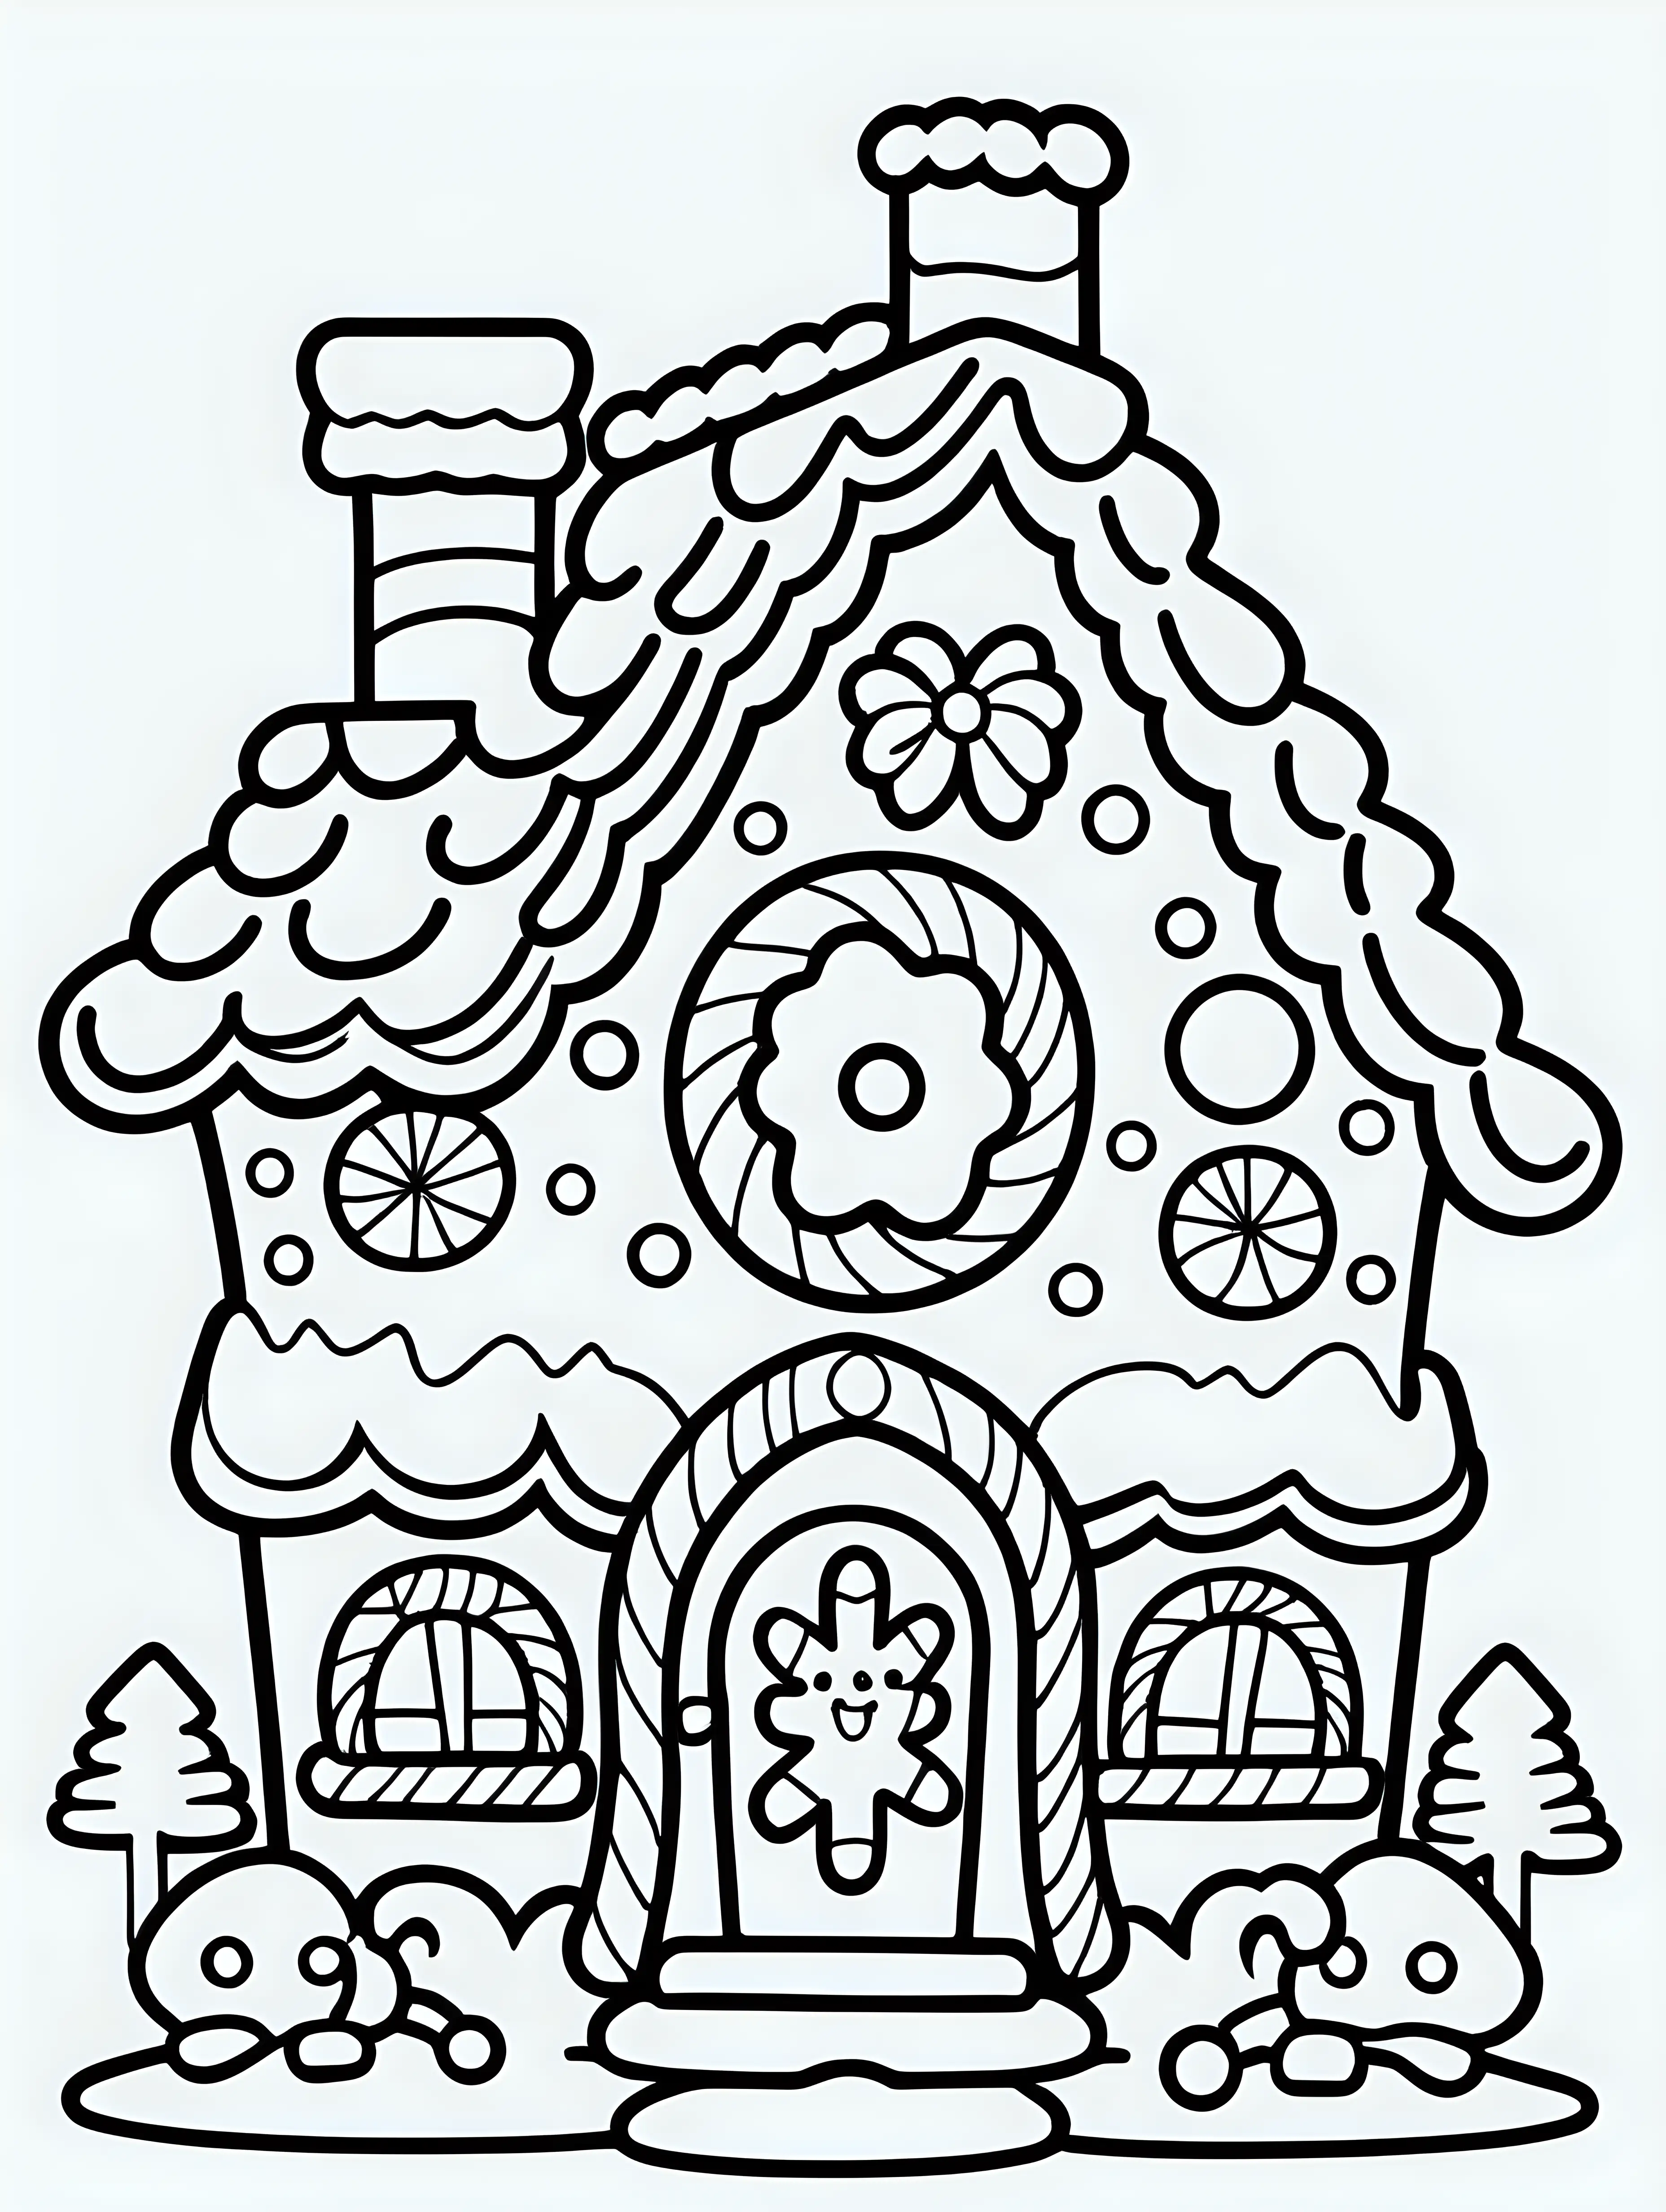 coloring book, cartoon drawing, clean black and white, single line, white background, large cute gingerbread house, emoji